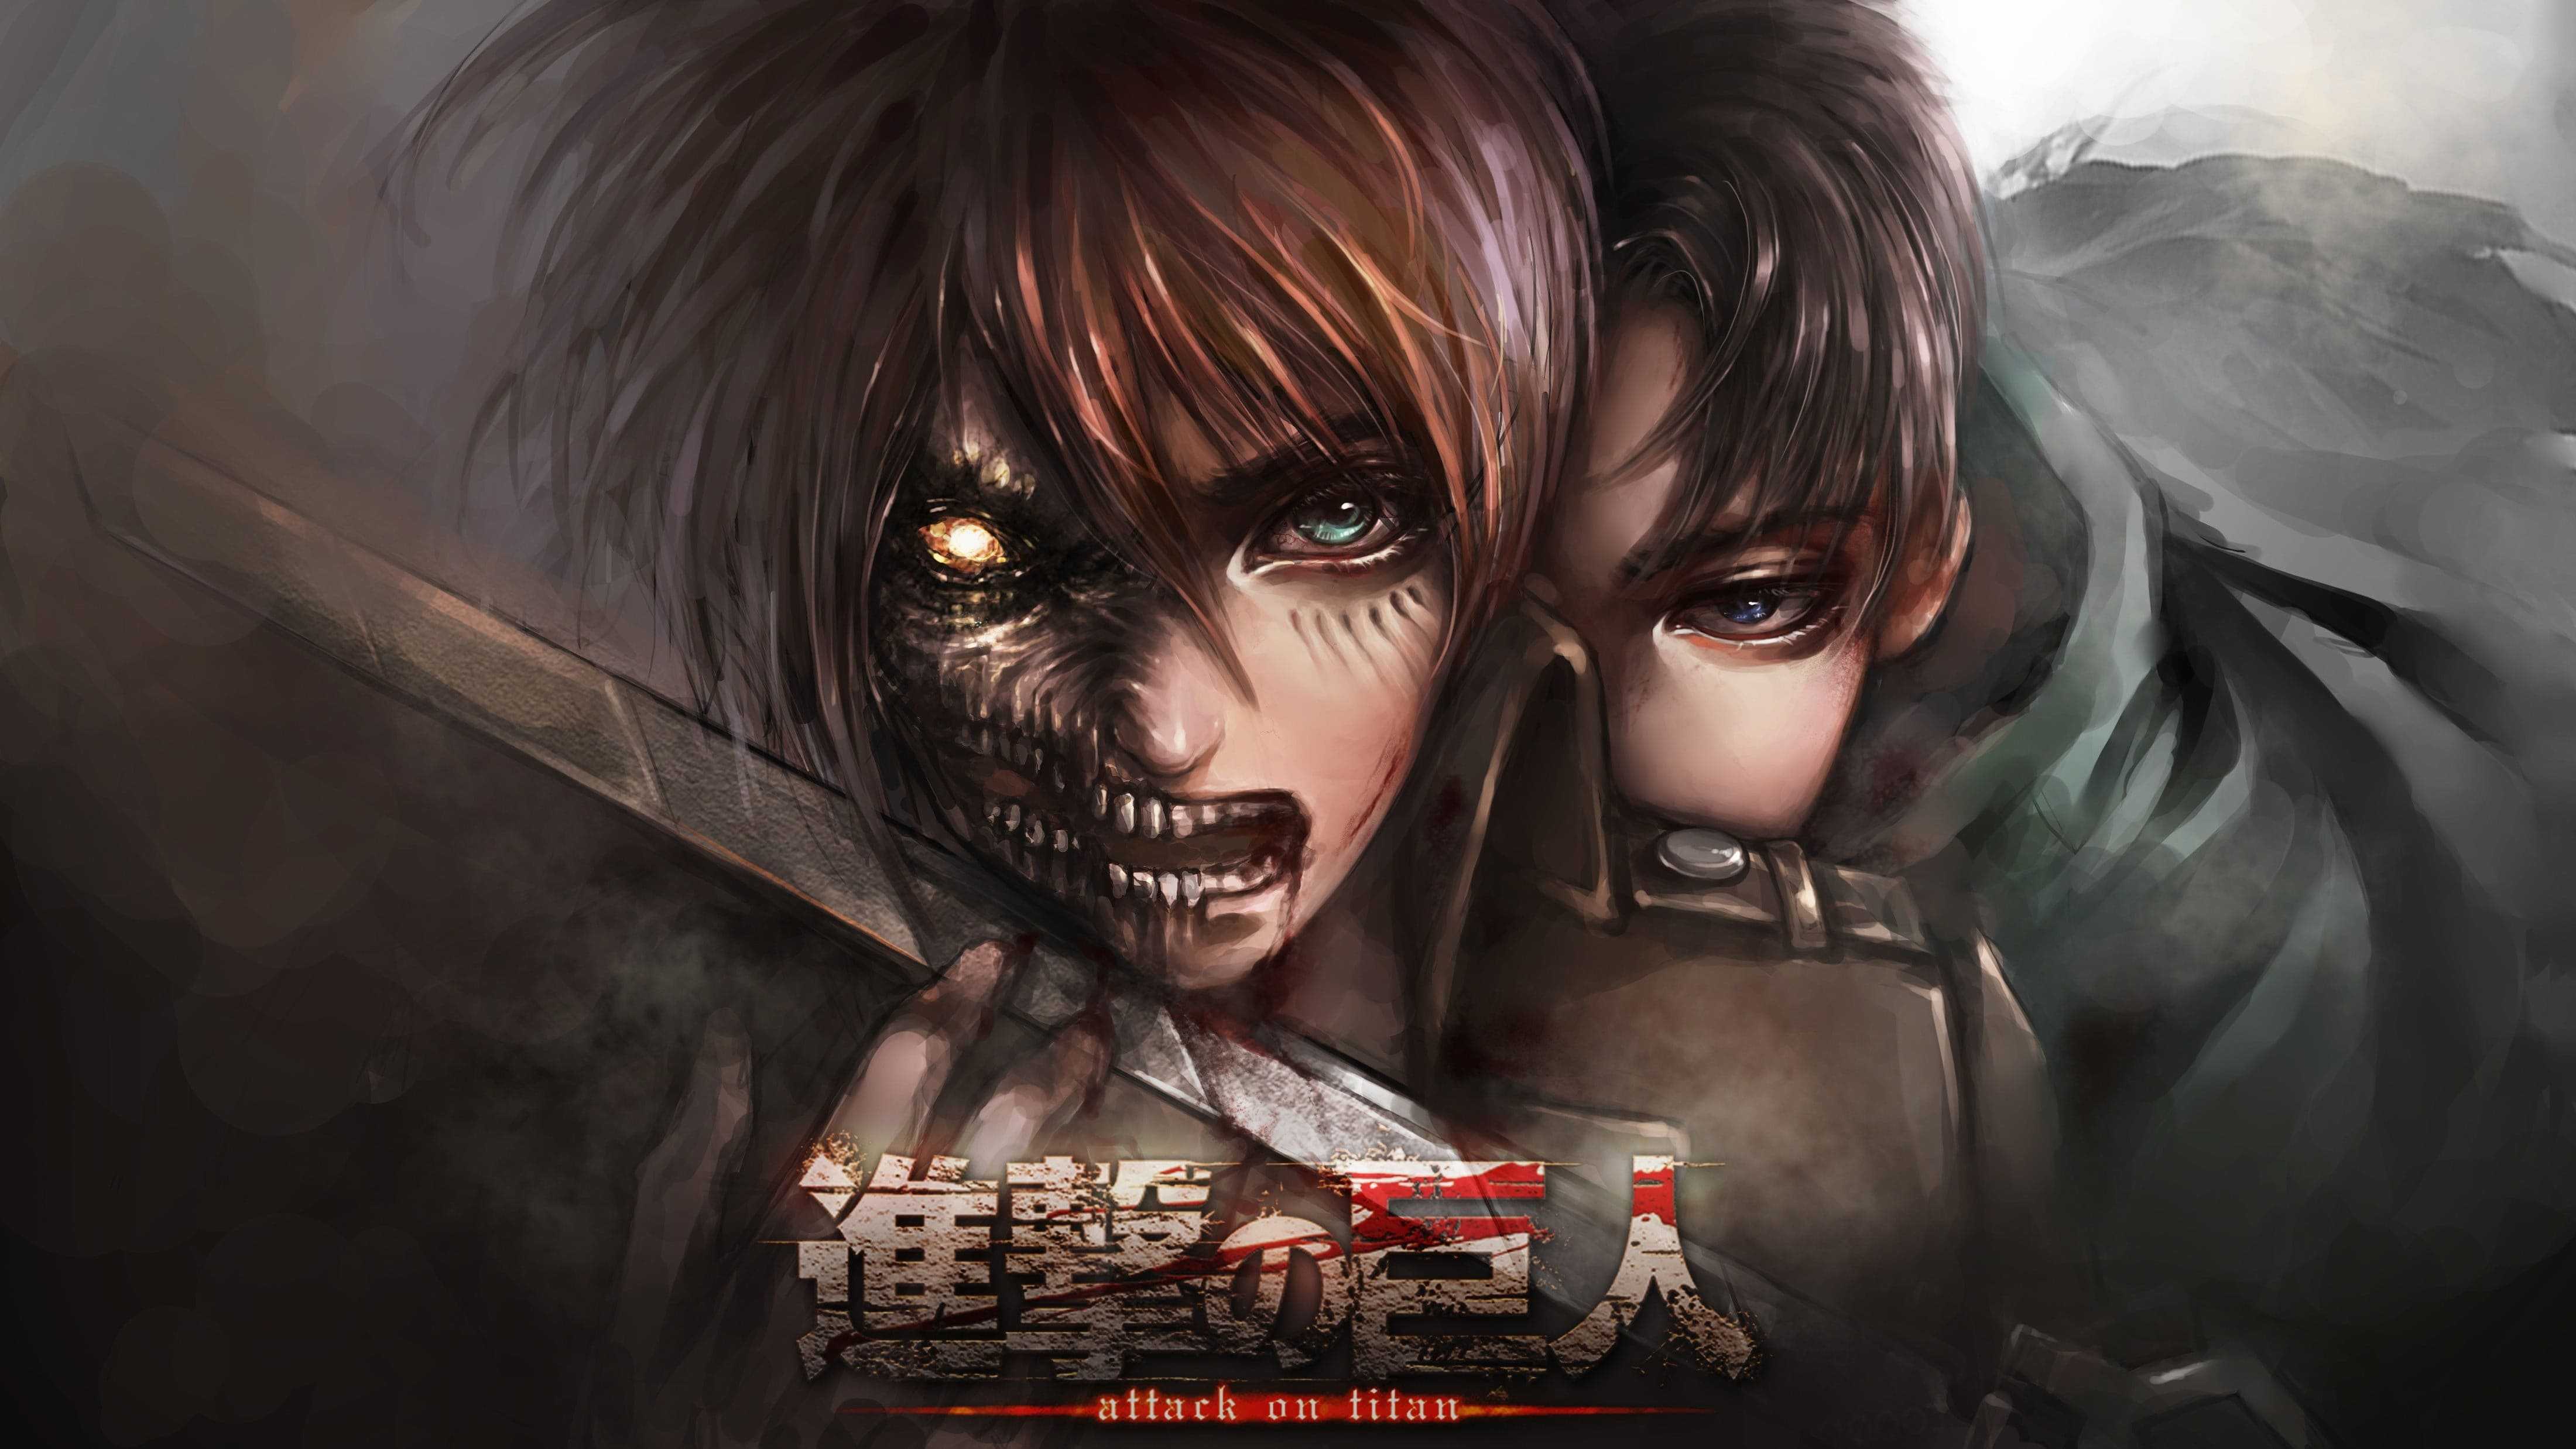 Wallpaper ID 302906  Anime Attack On Titan Phone Wallpaper Historia  Reiss Titan Ymir Attack On Titan 1440x3200 free download